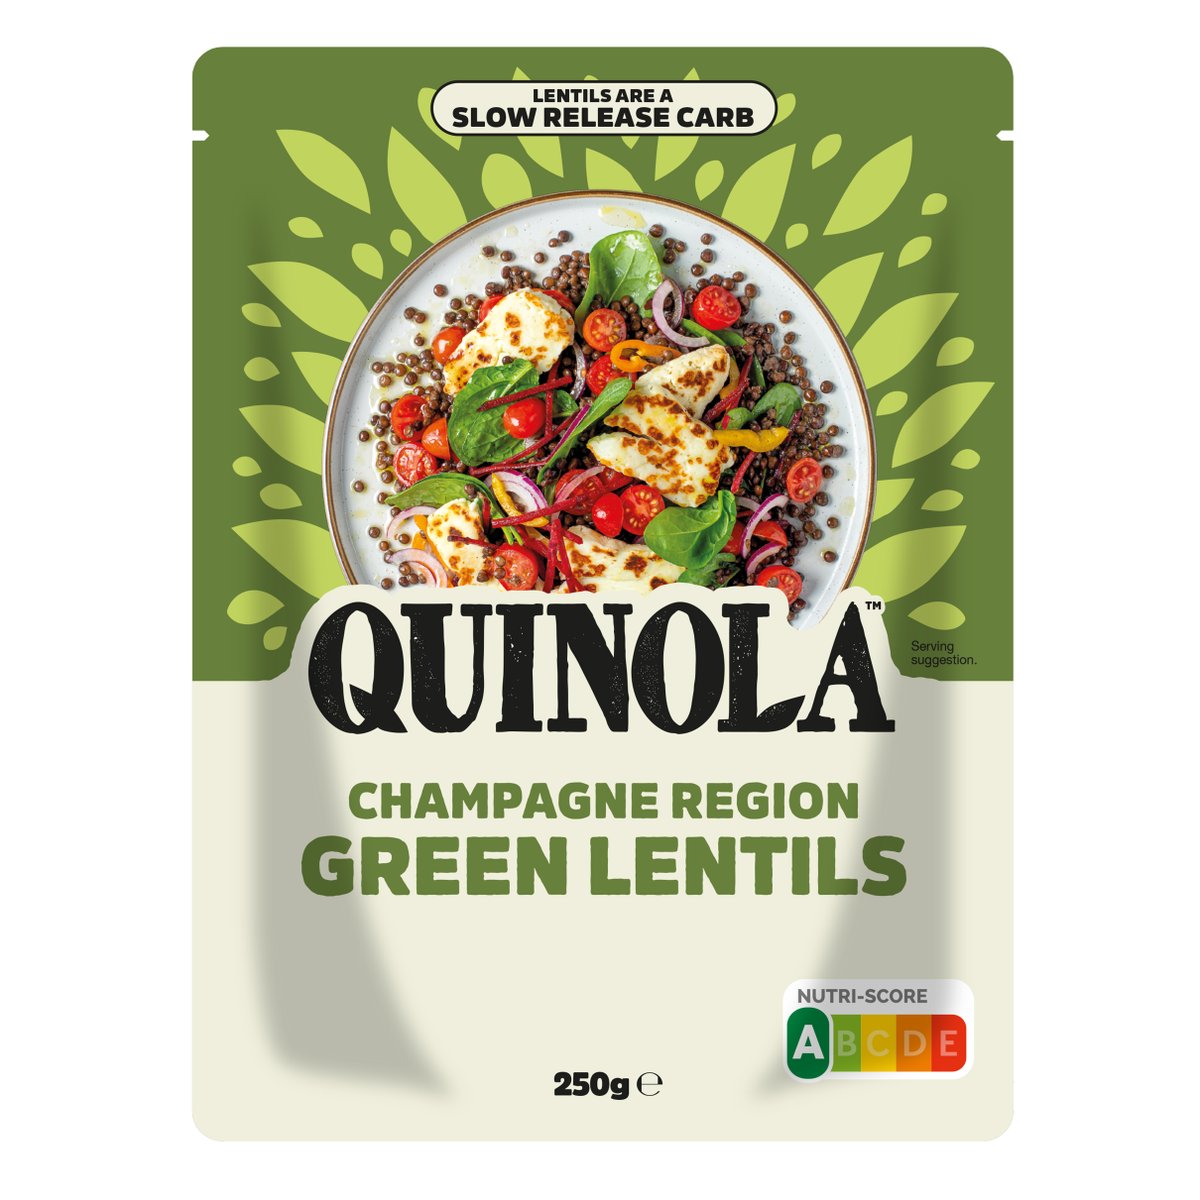 From salads to stews, soups to sides, @quinolauk Champagne region Green Lentils do it all! 🥗 Versatile, nutritious, and delicious - elevate every meal with @quinolauk🌱 #Vegan approved by @vegsoc💚 #VegetarianSocietyApproved #GreenLentils #QuinoaUK #HealthyEating